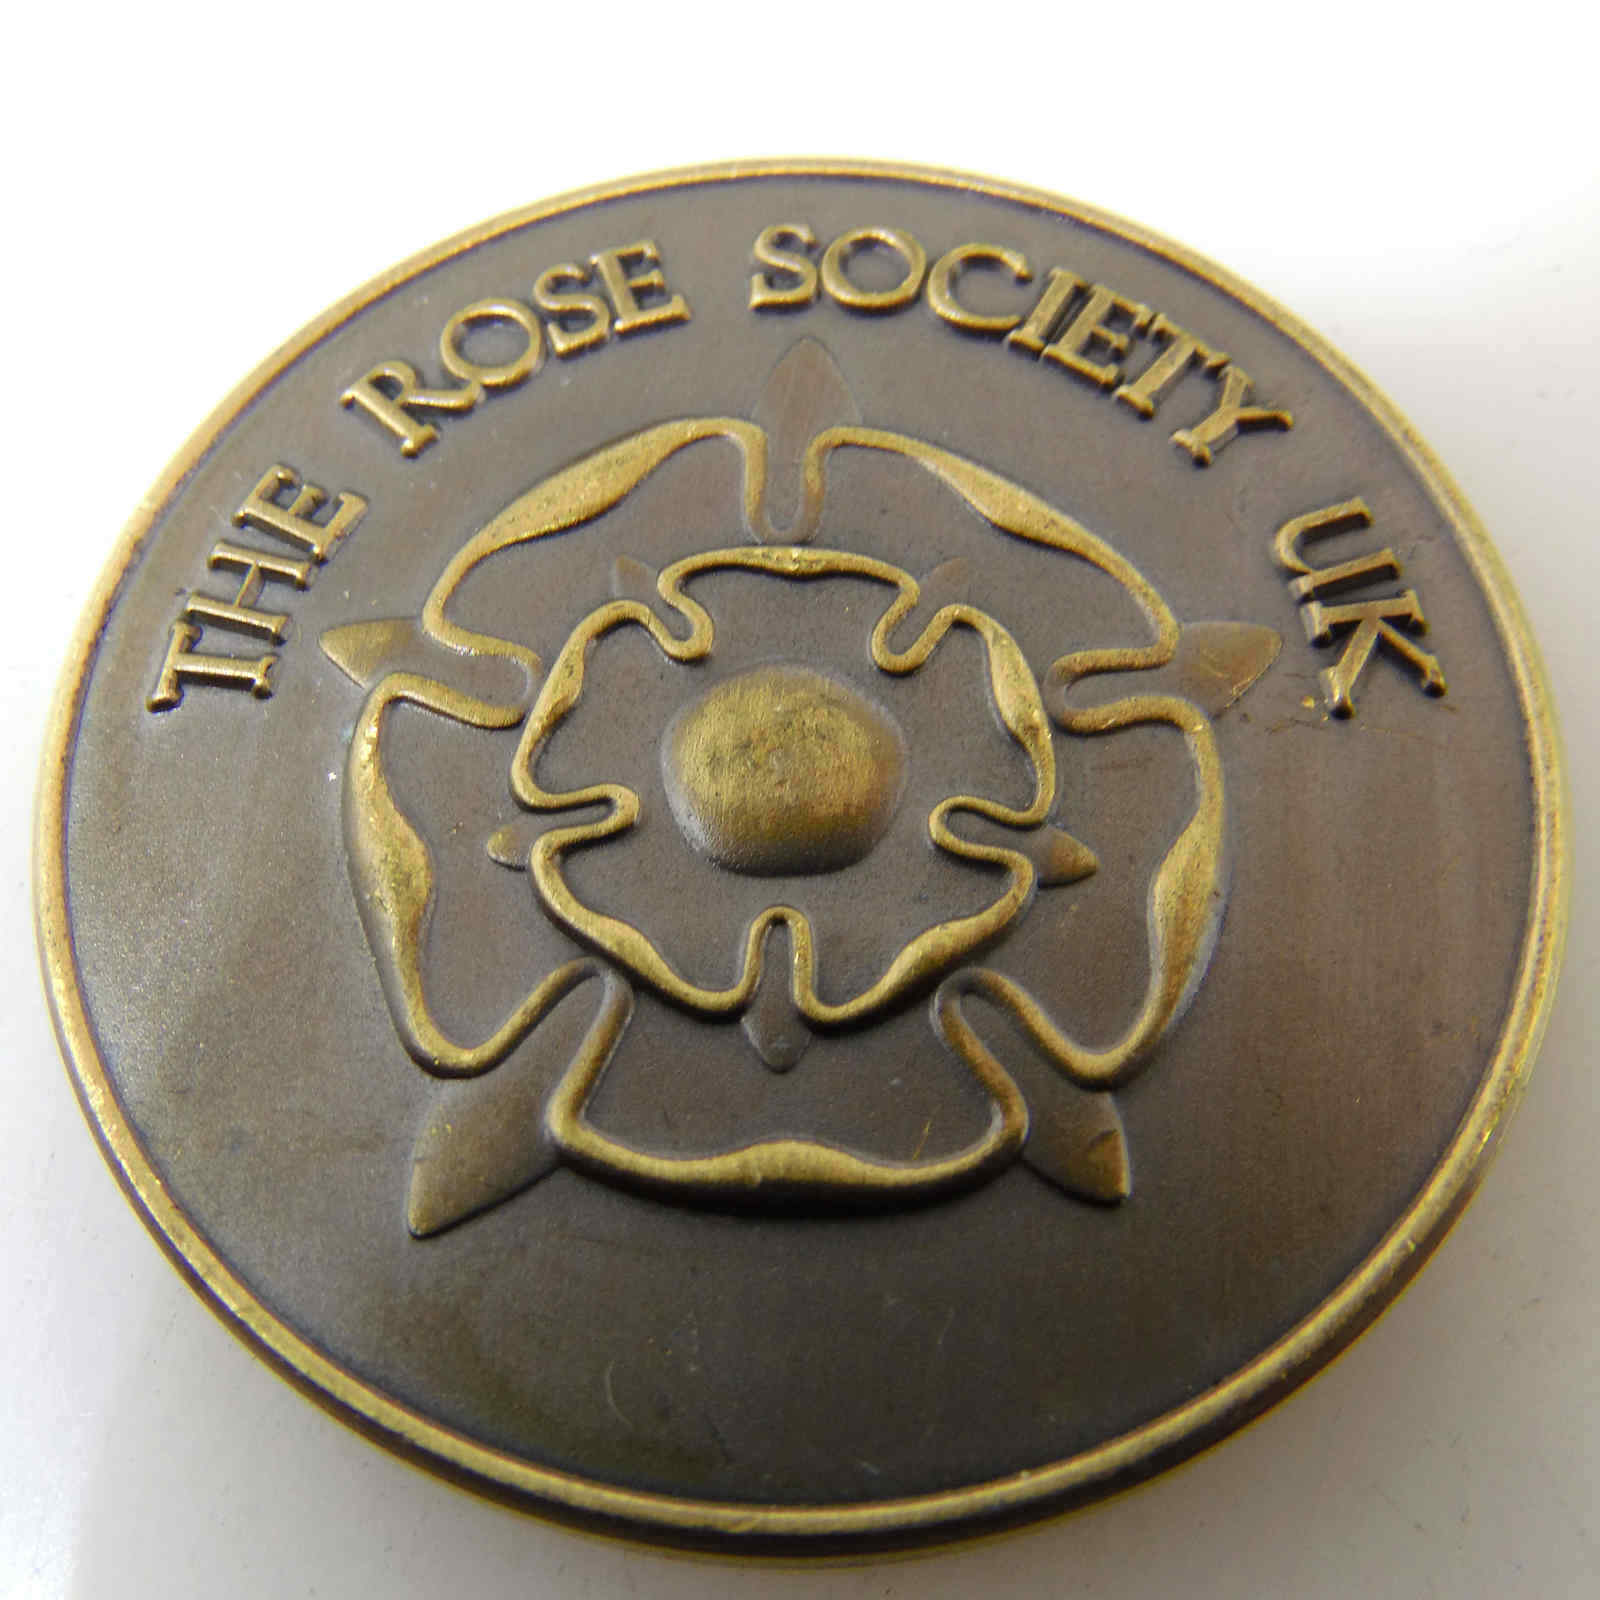 THE ROSE SOCIETY UK CHALLENGE COIN